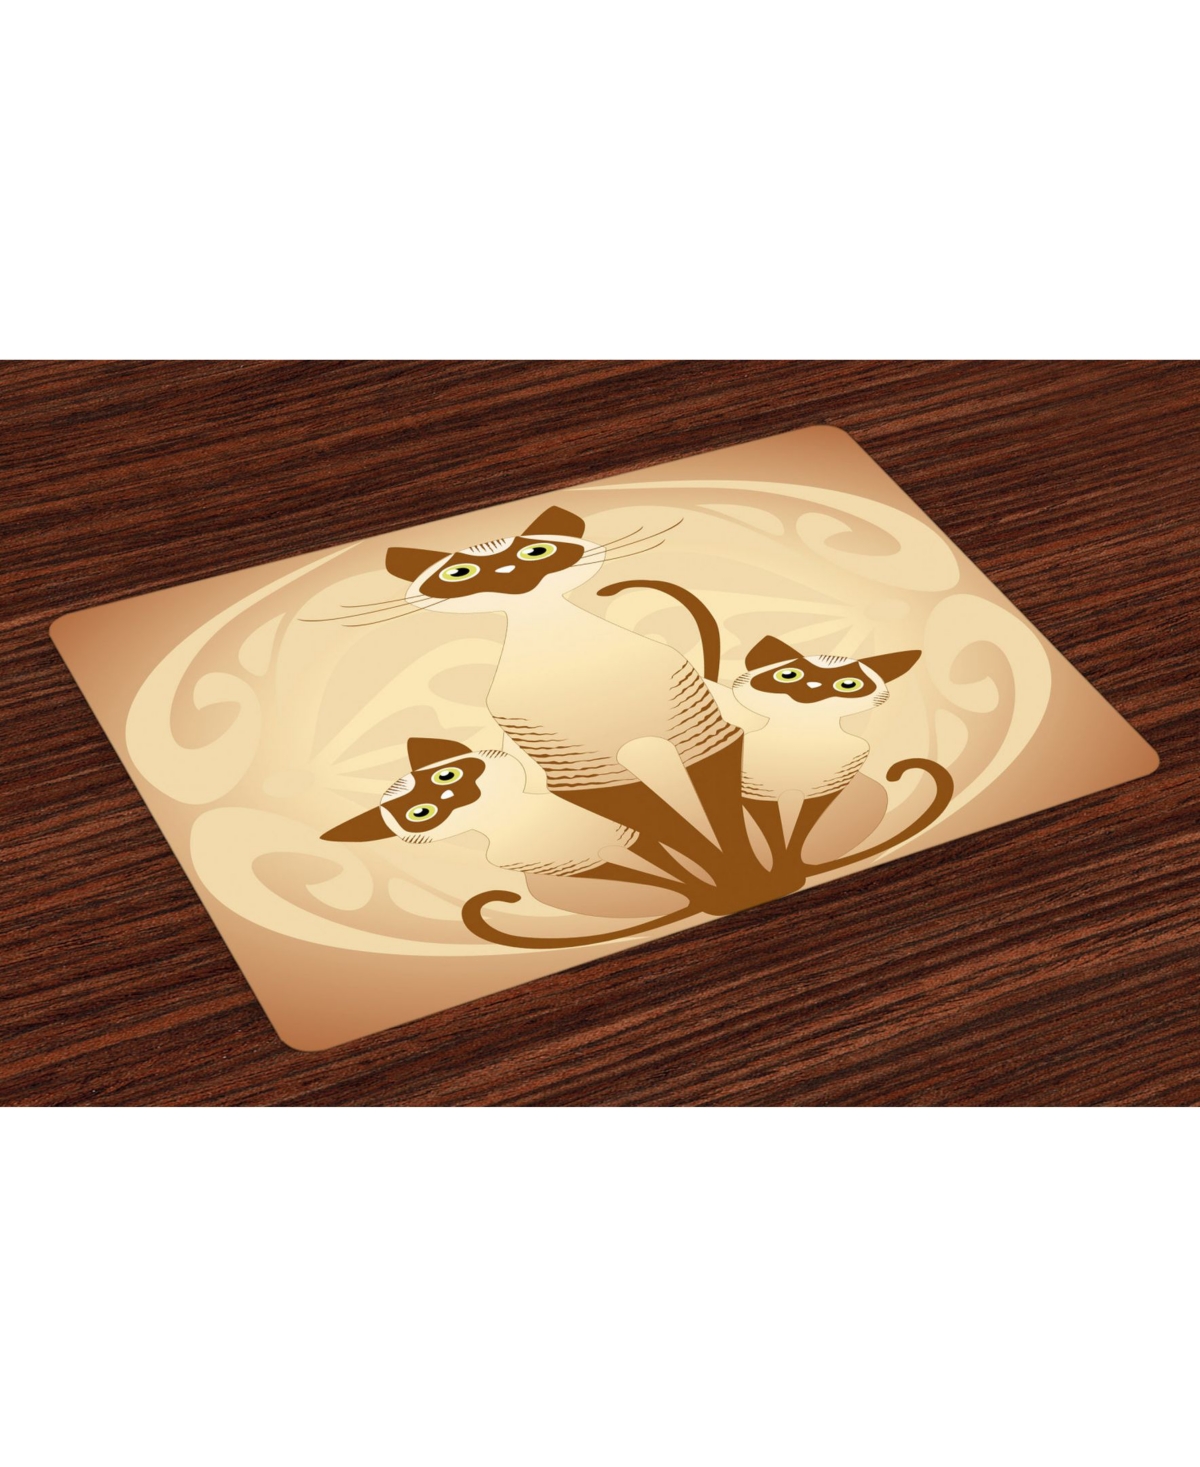 AMBESONNE ANIMAL PLACE MATS, SET OF 4